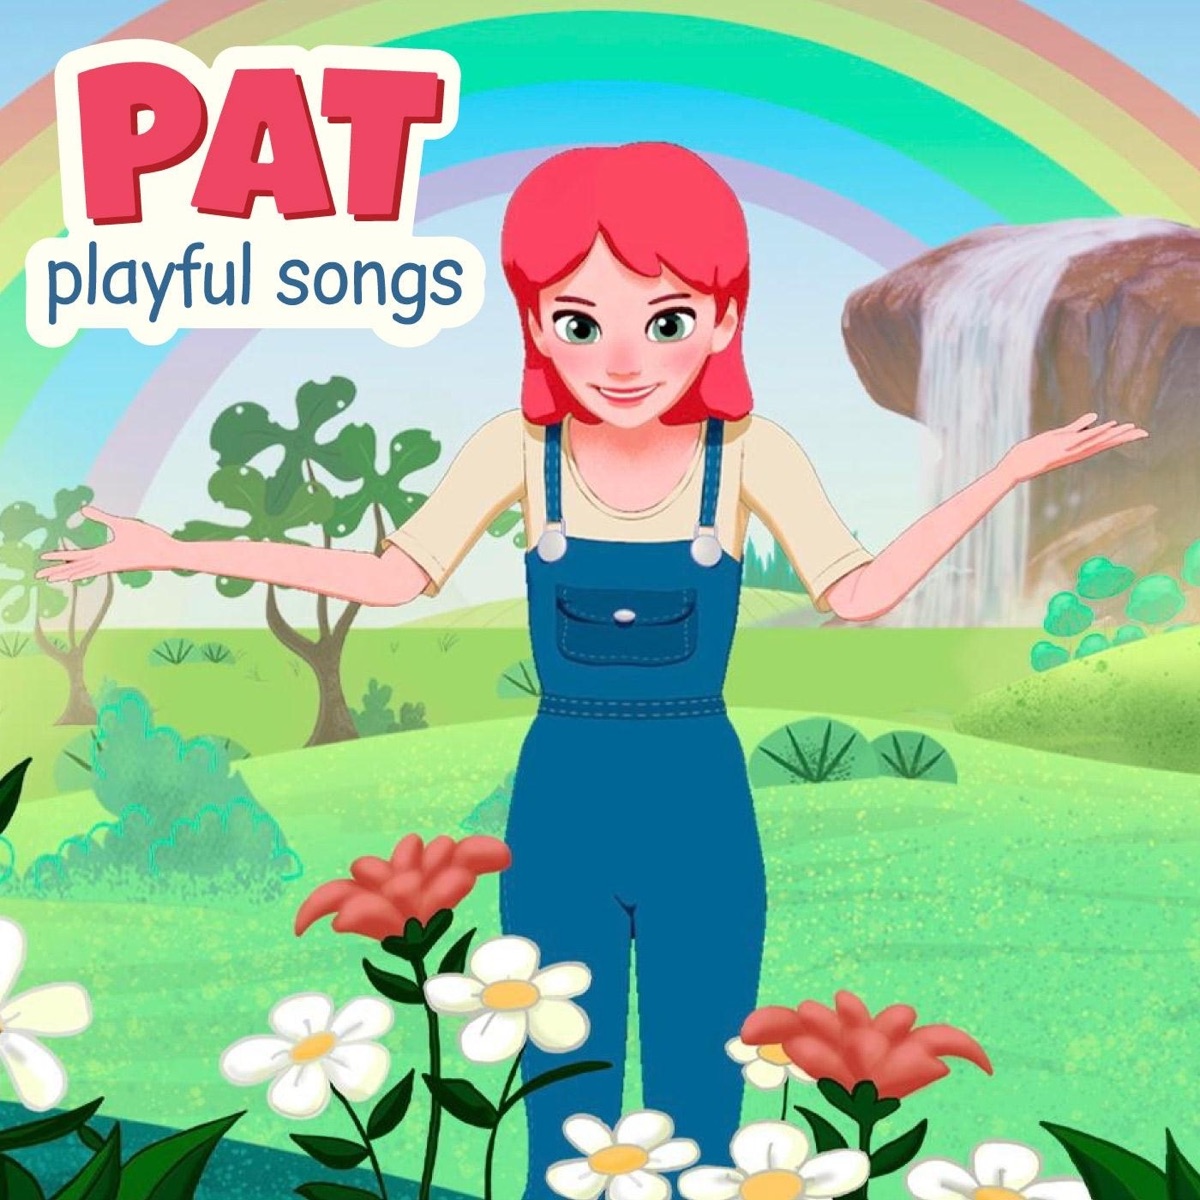 Pat Playful Songs - Single - Album by Patricia Pearson - Apple Music